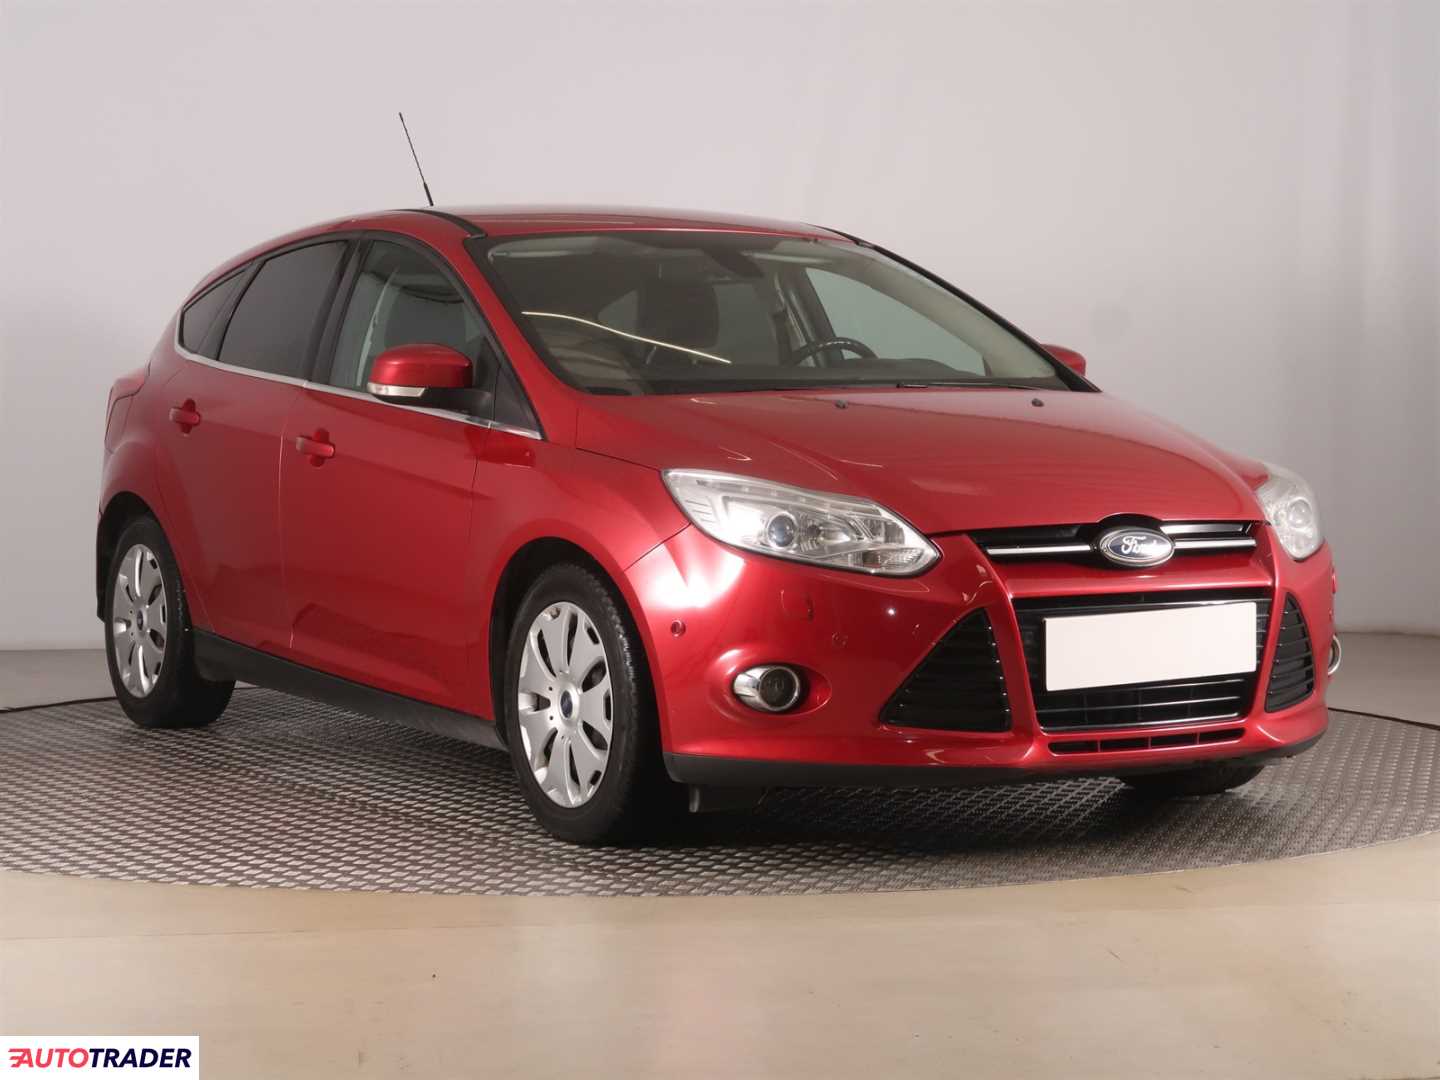 Ford Focus 2011 1.6 113 KM